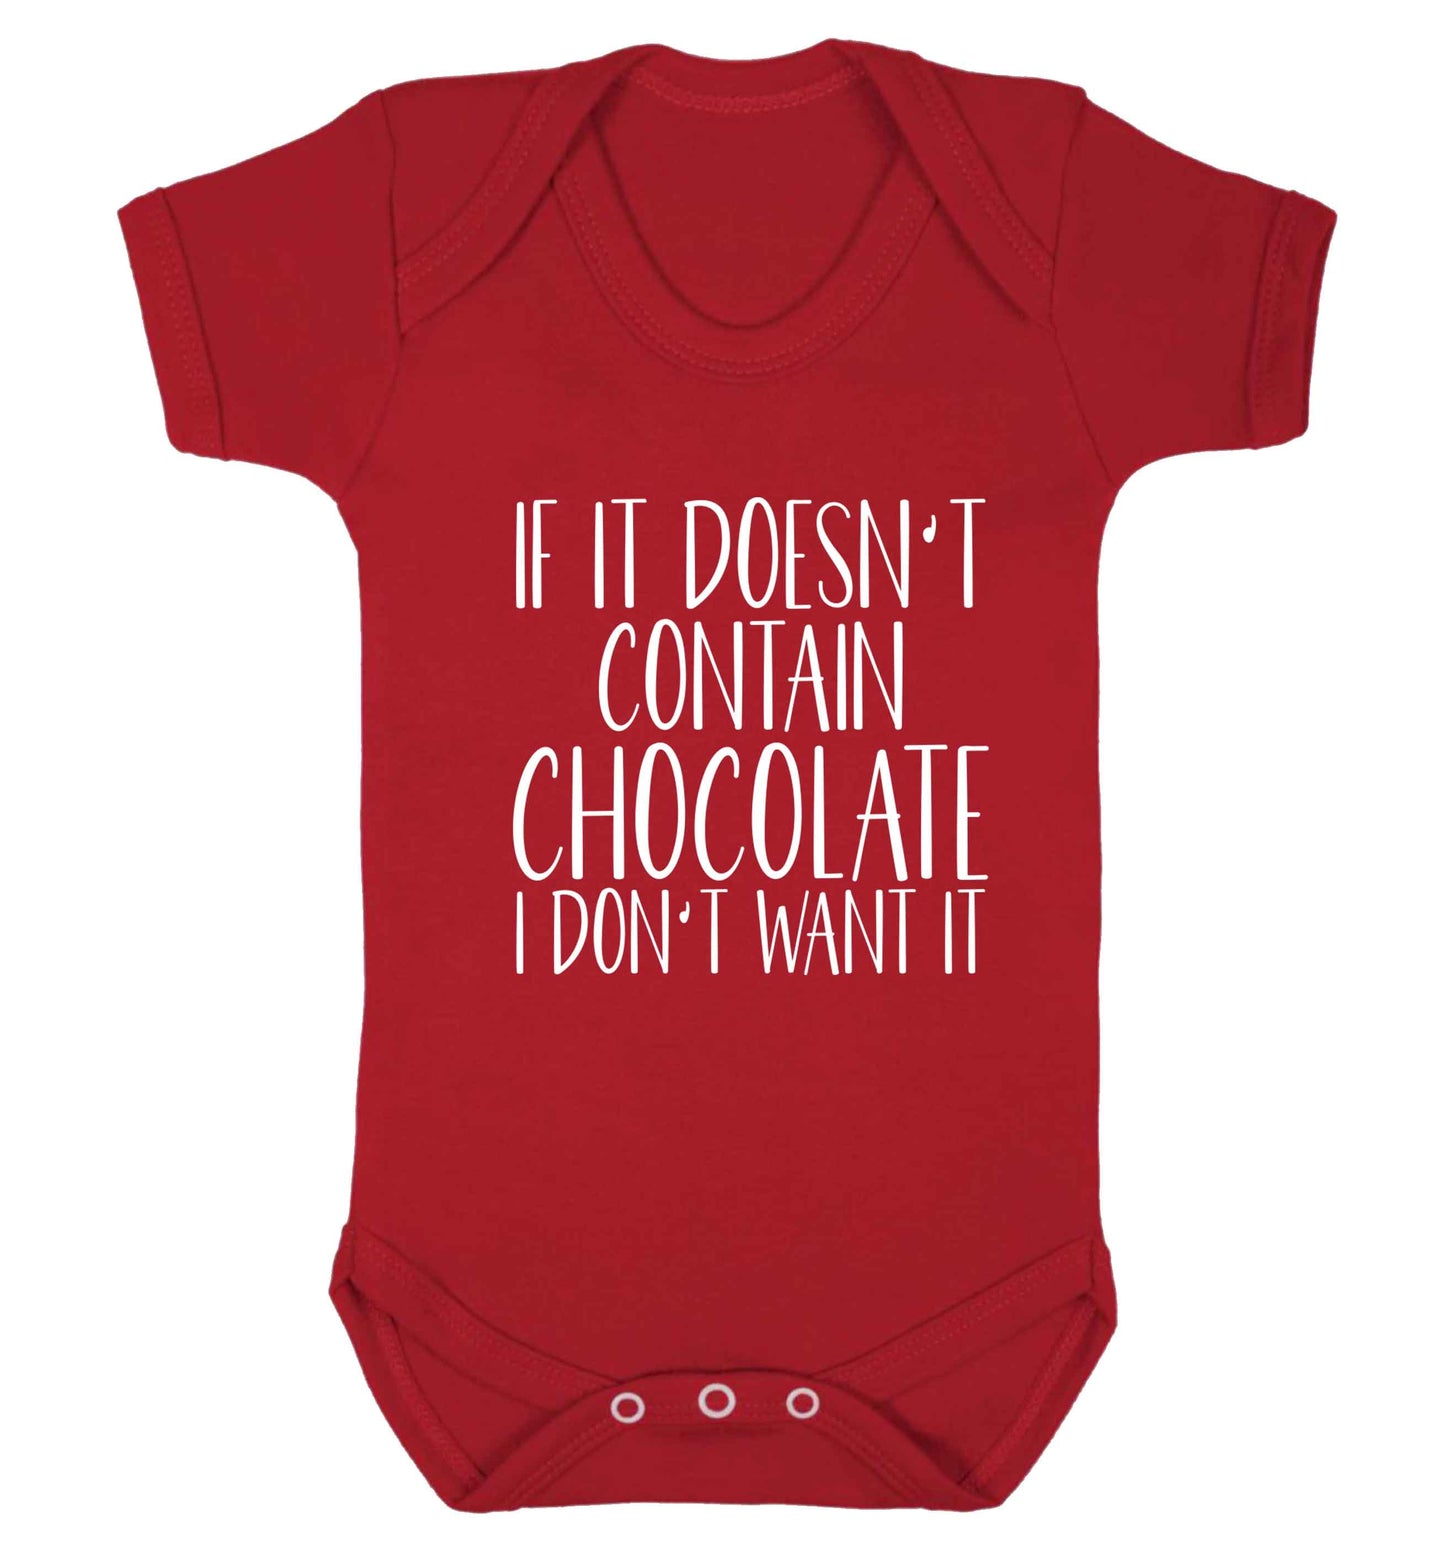 If it doesn't contain chocolate I don't want it baby vest red 18-24 months